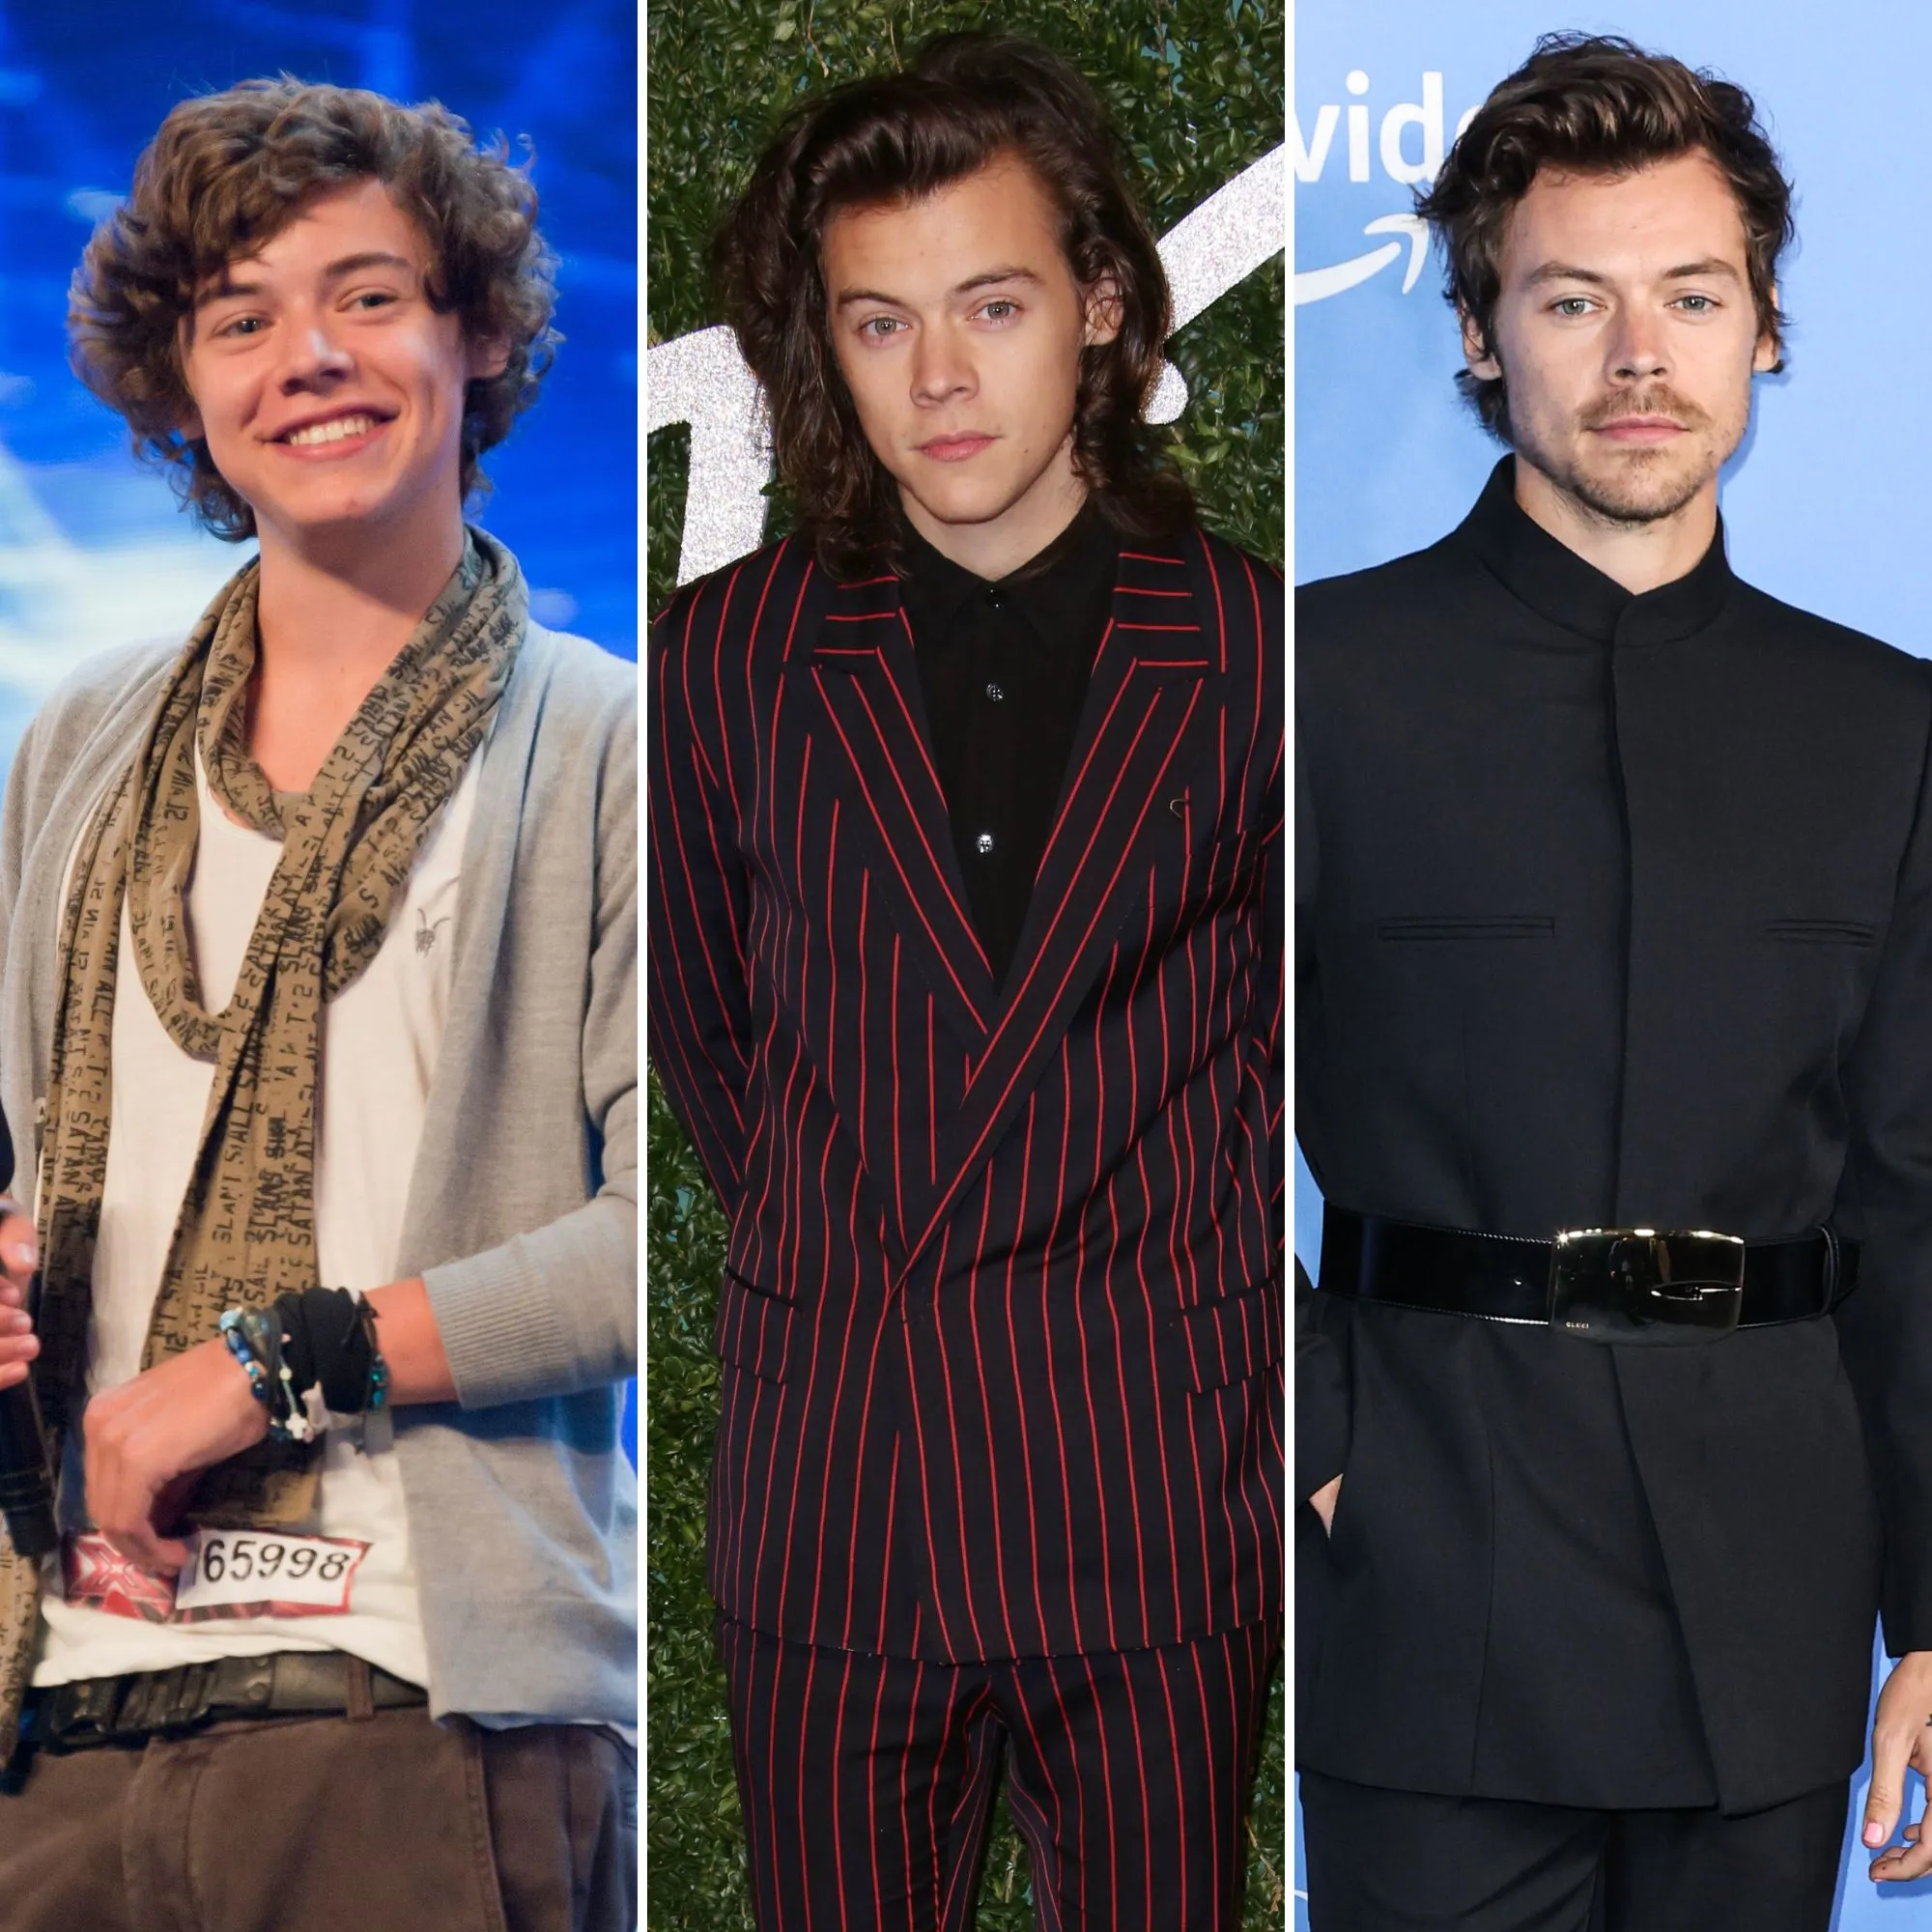 Harry Styles Rolled Out A Major Improvement And Fans Are Shaken